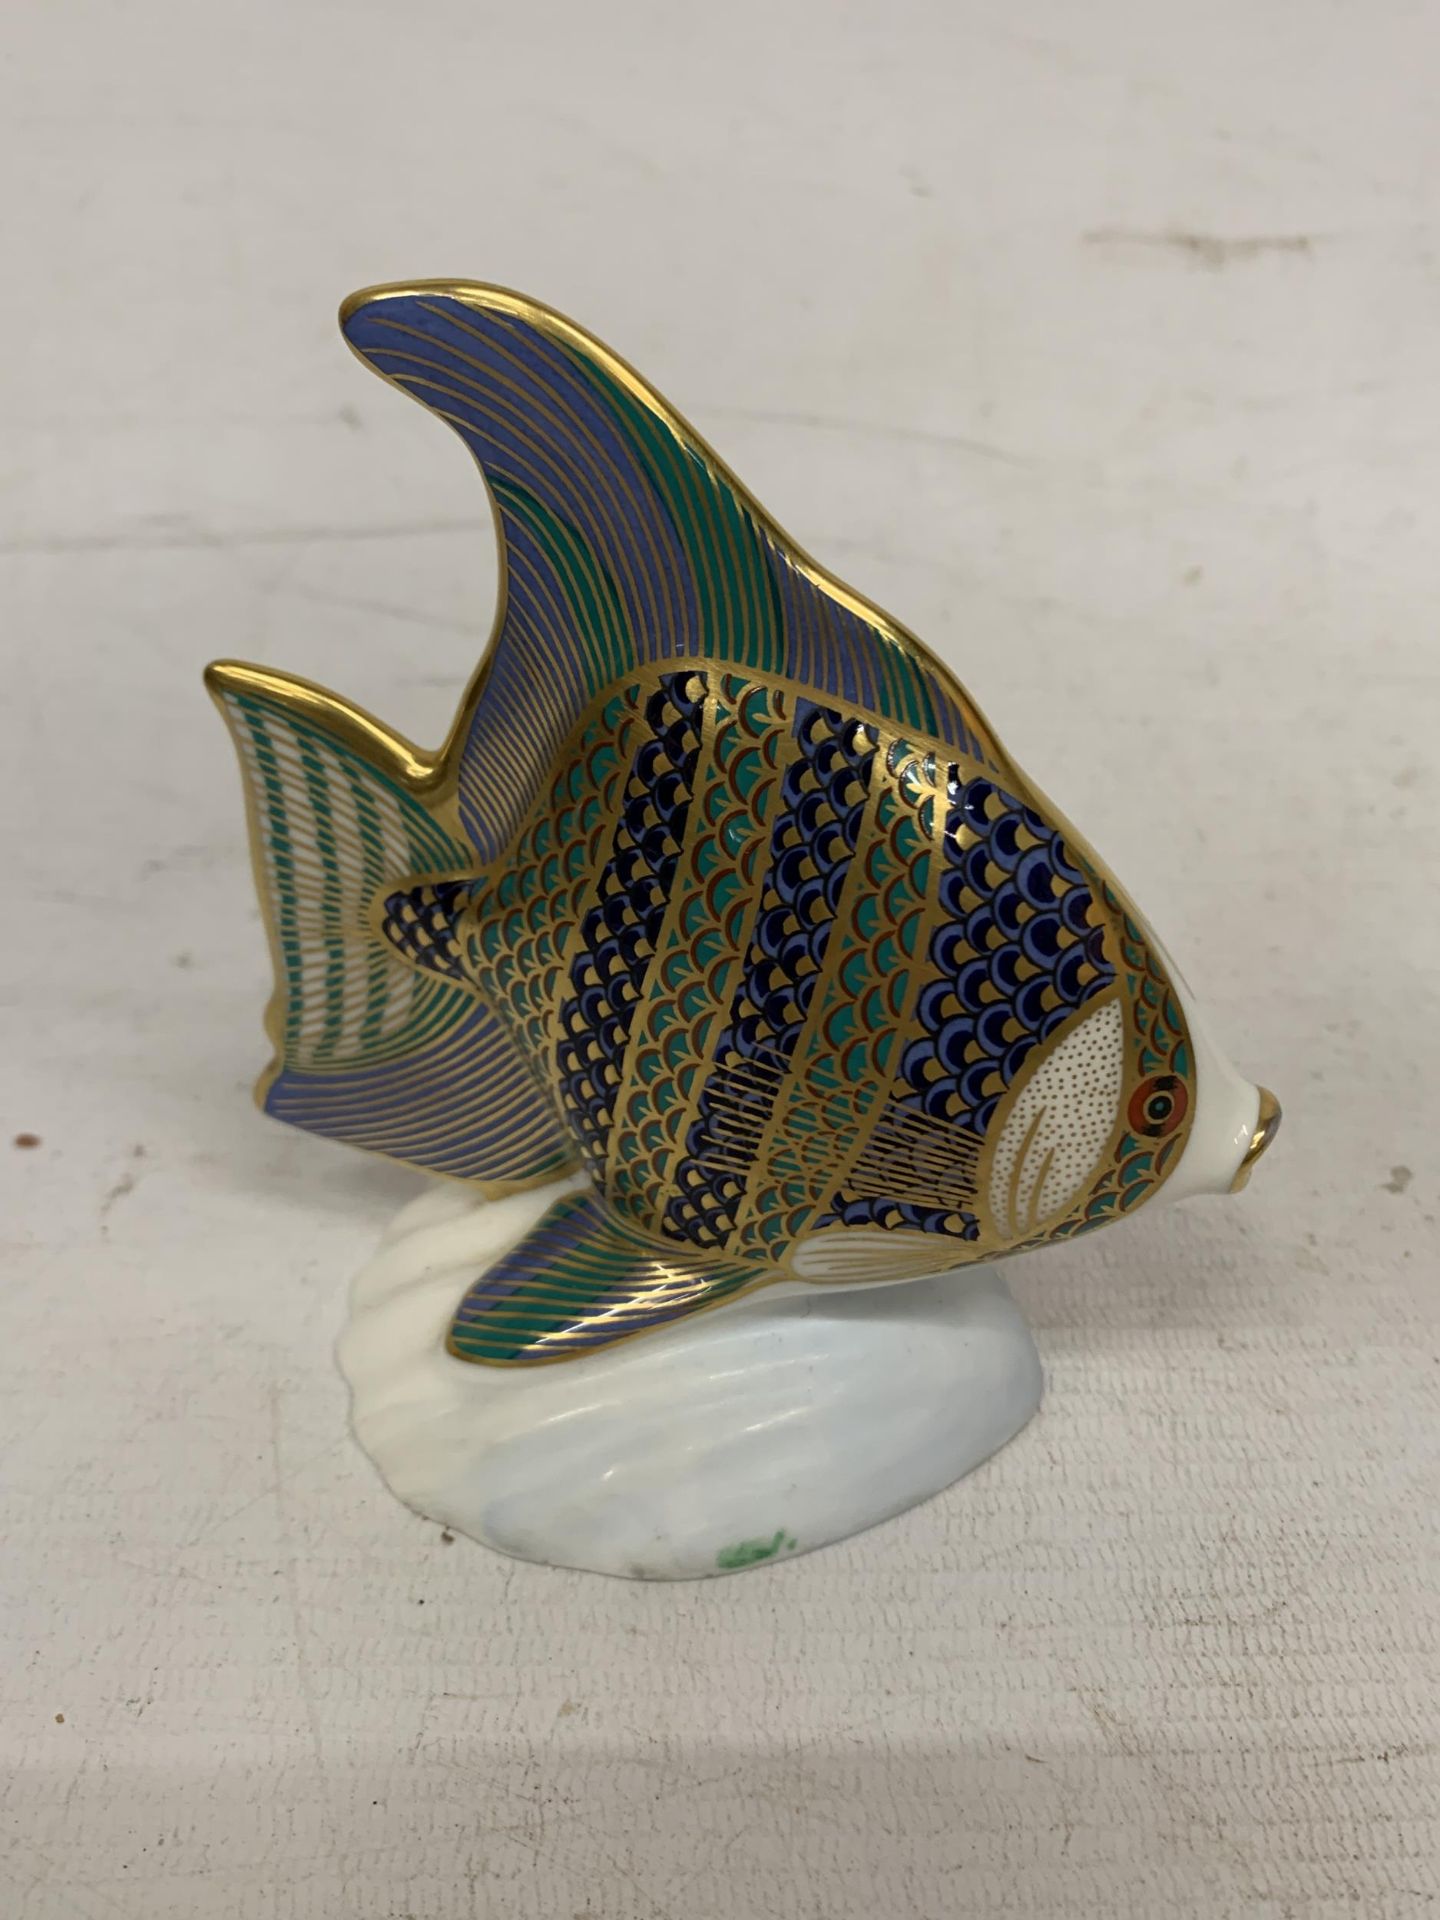 A ROYAL CROWN DERBY ANGEL FISH - Image 2 of 3